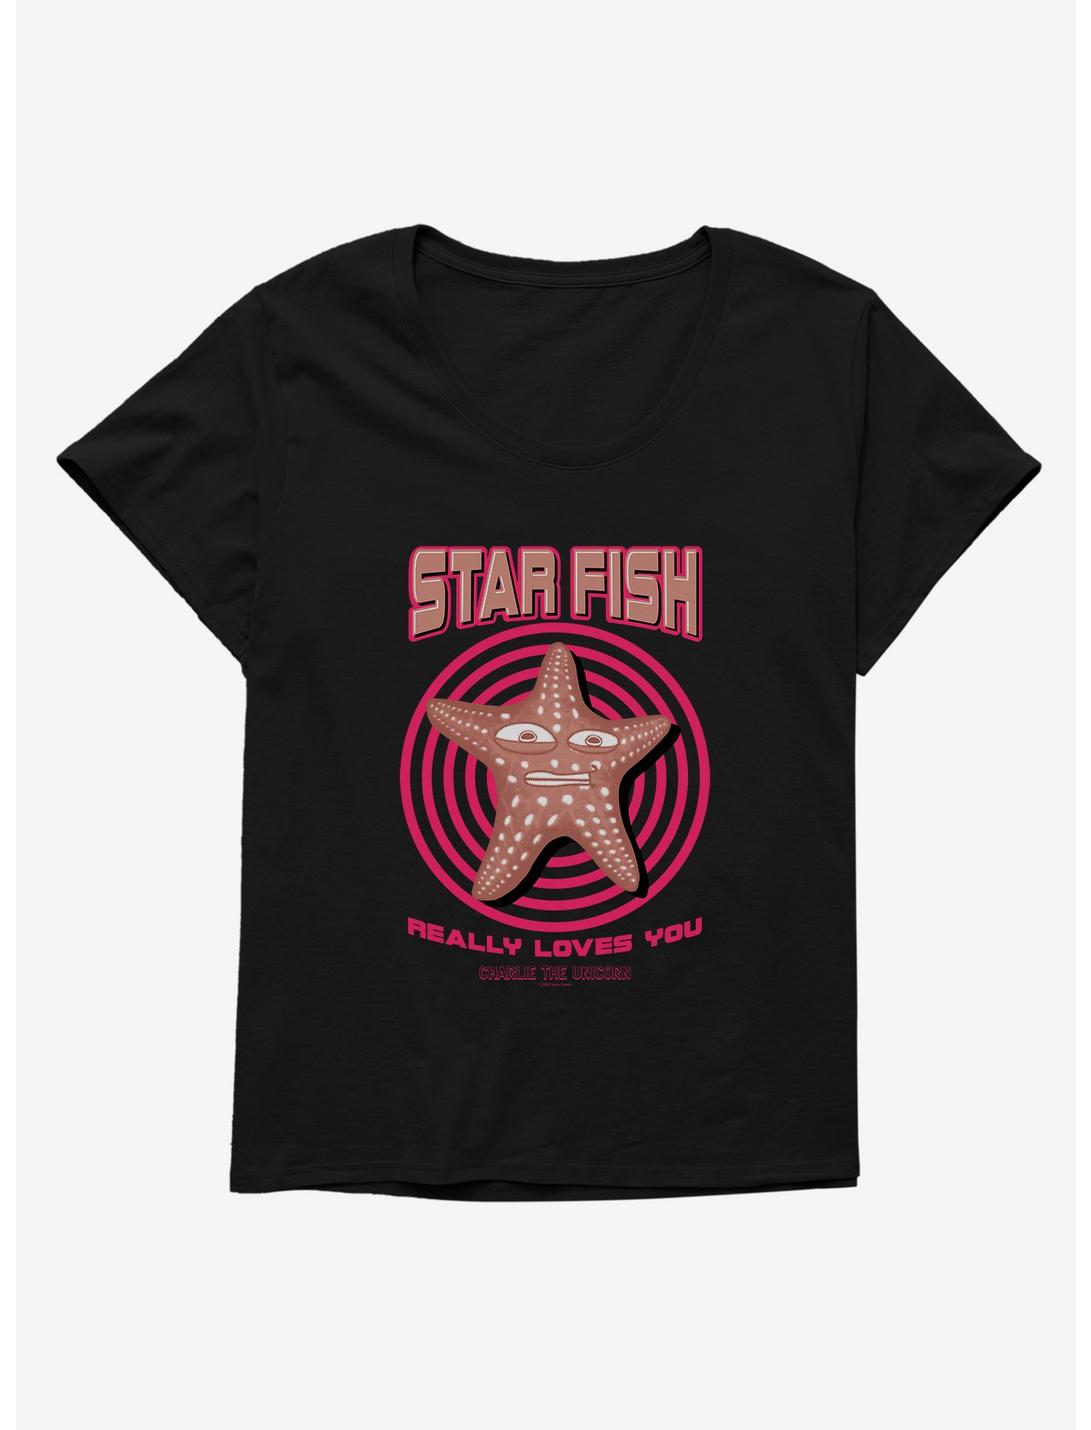 Charlie The Unicorn Star Fish Really Loves You Womens T-Shirt Plus Size, BLACK, hi-res